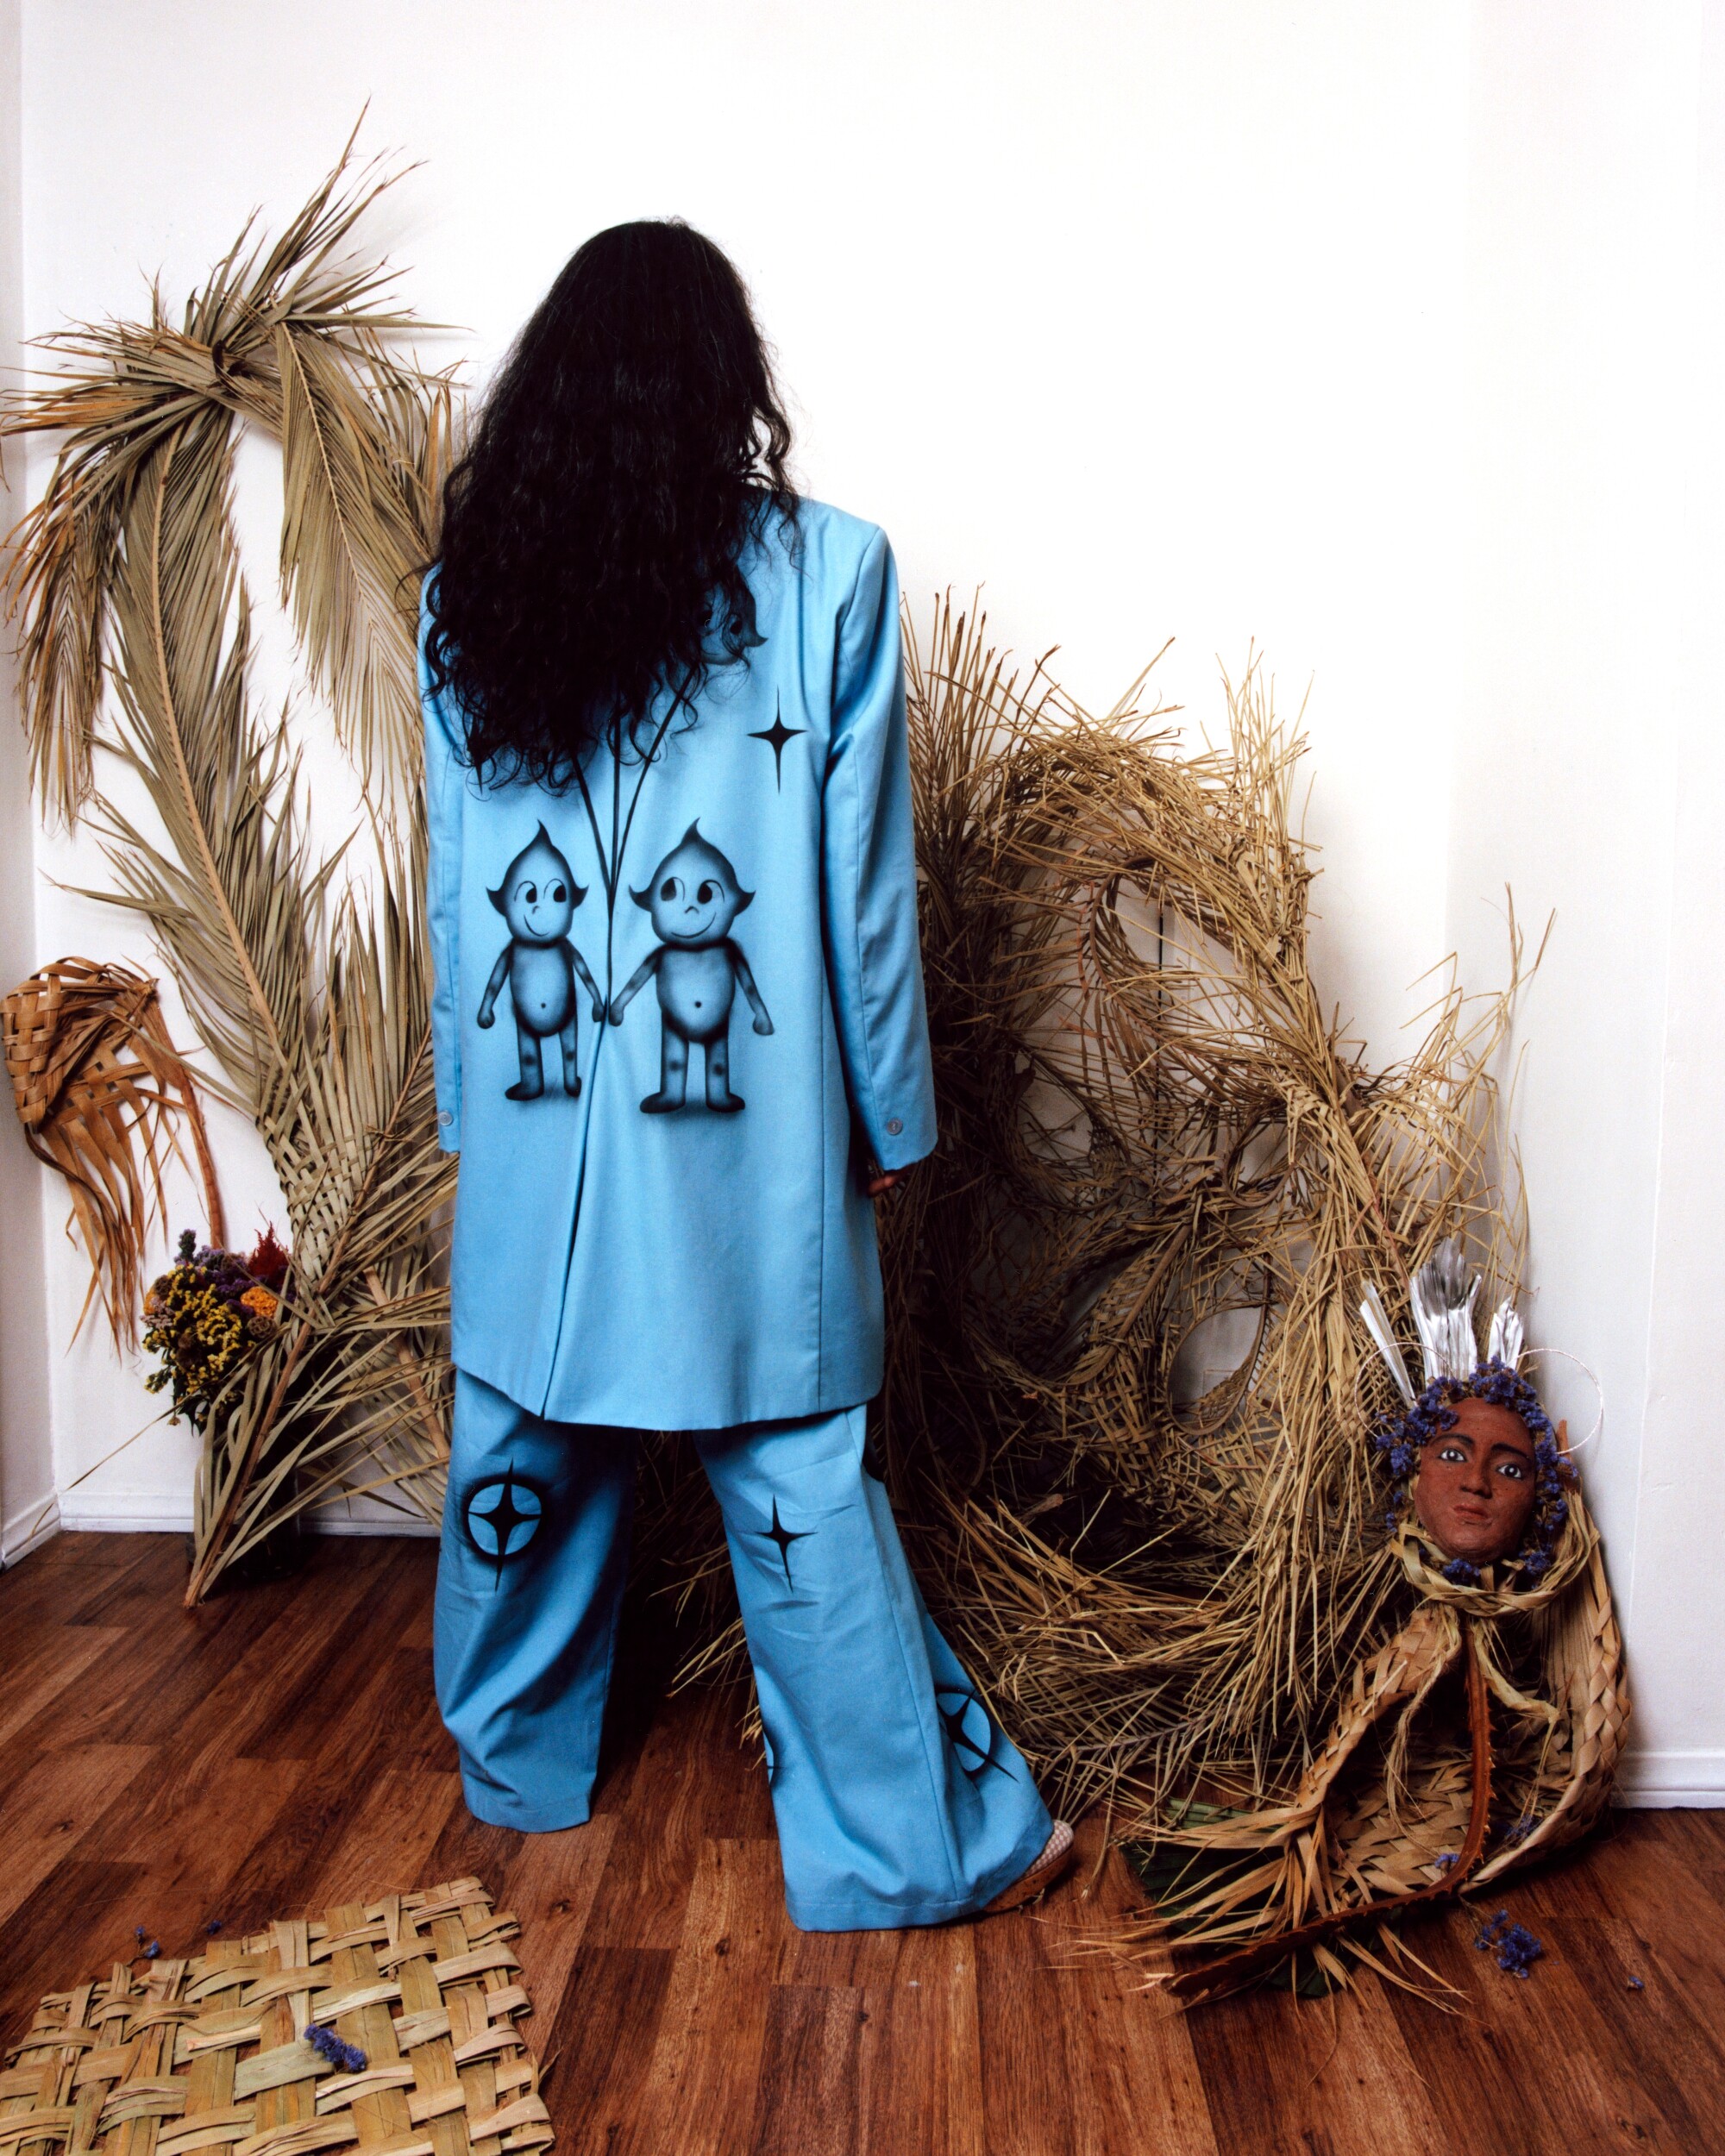 Photograph of artist Maria Maea, pictured in custom suit by Julissa Aaron.